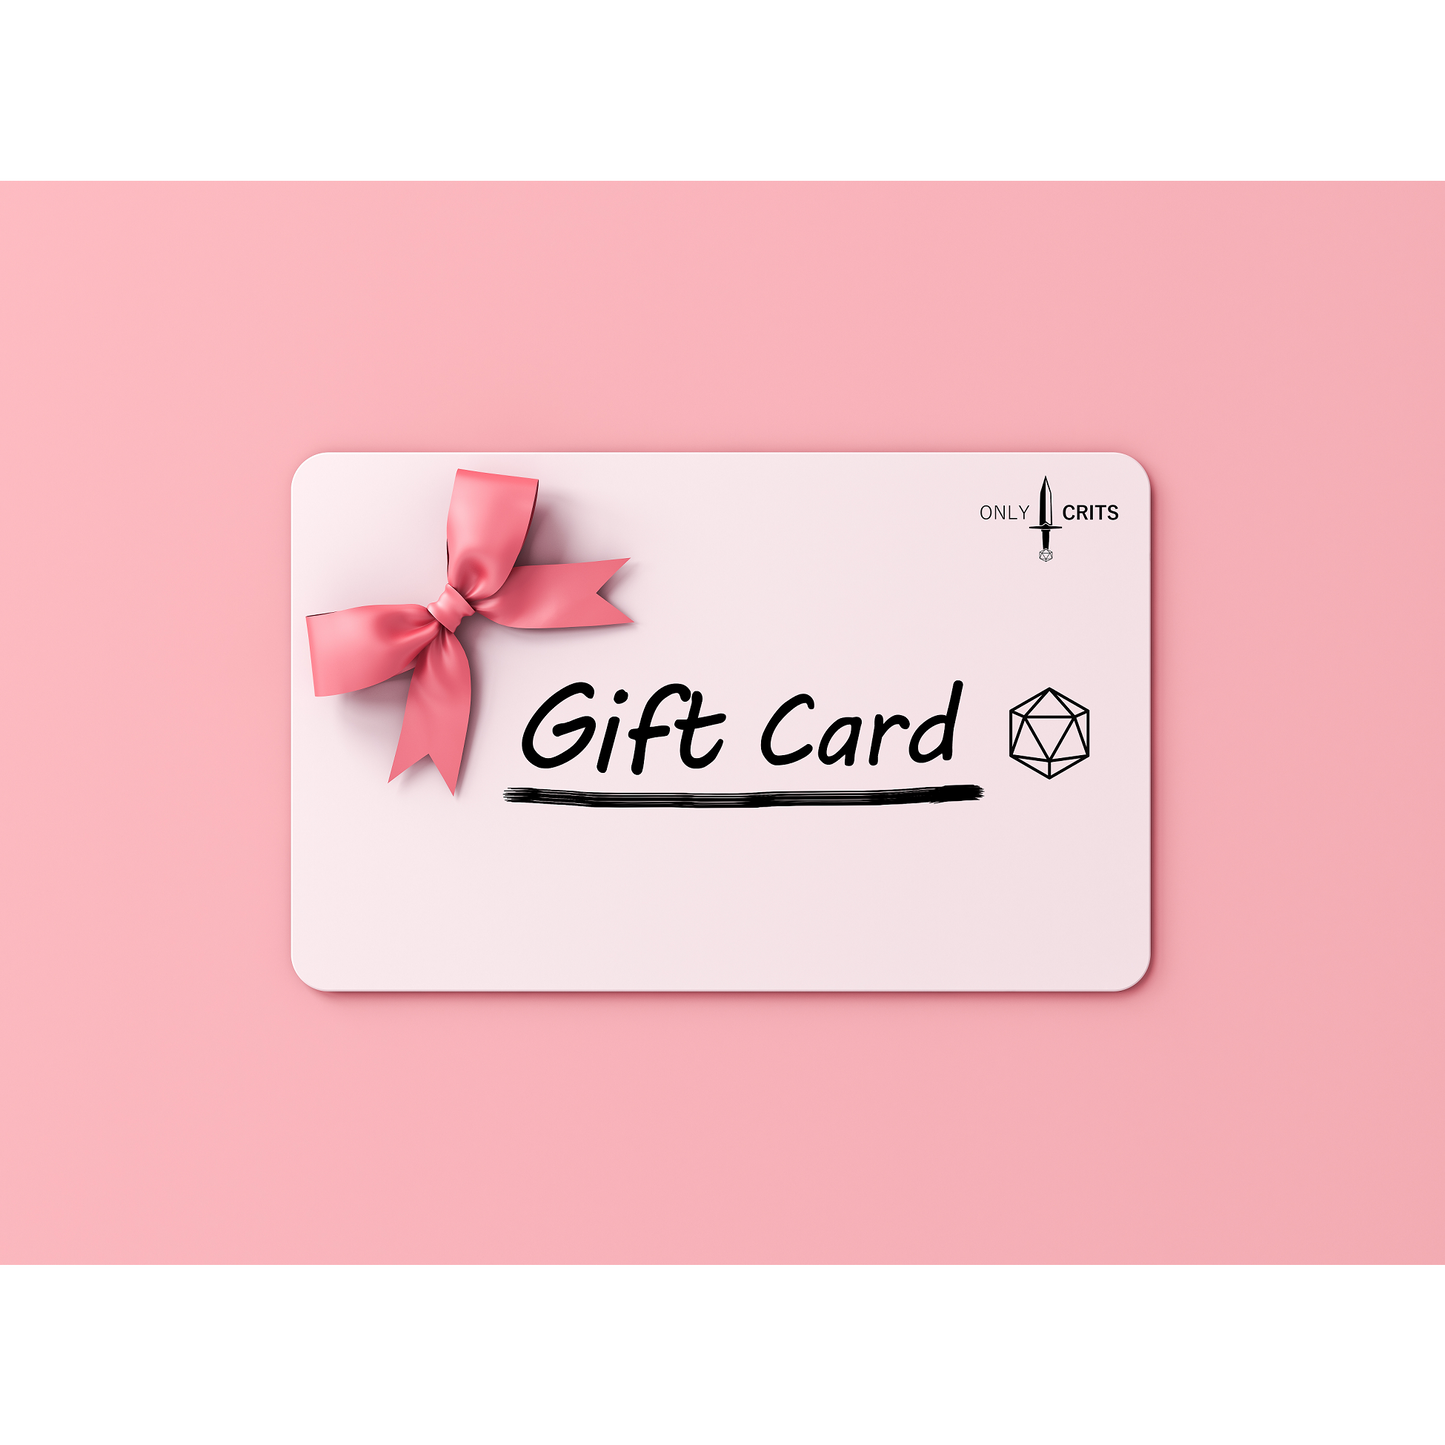 Only Crits Gift Card